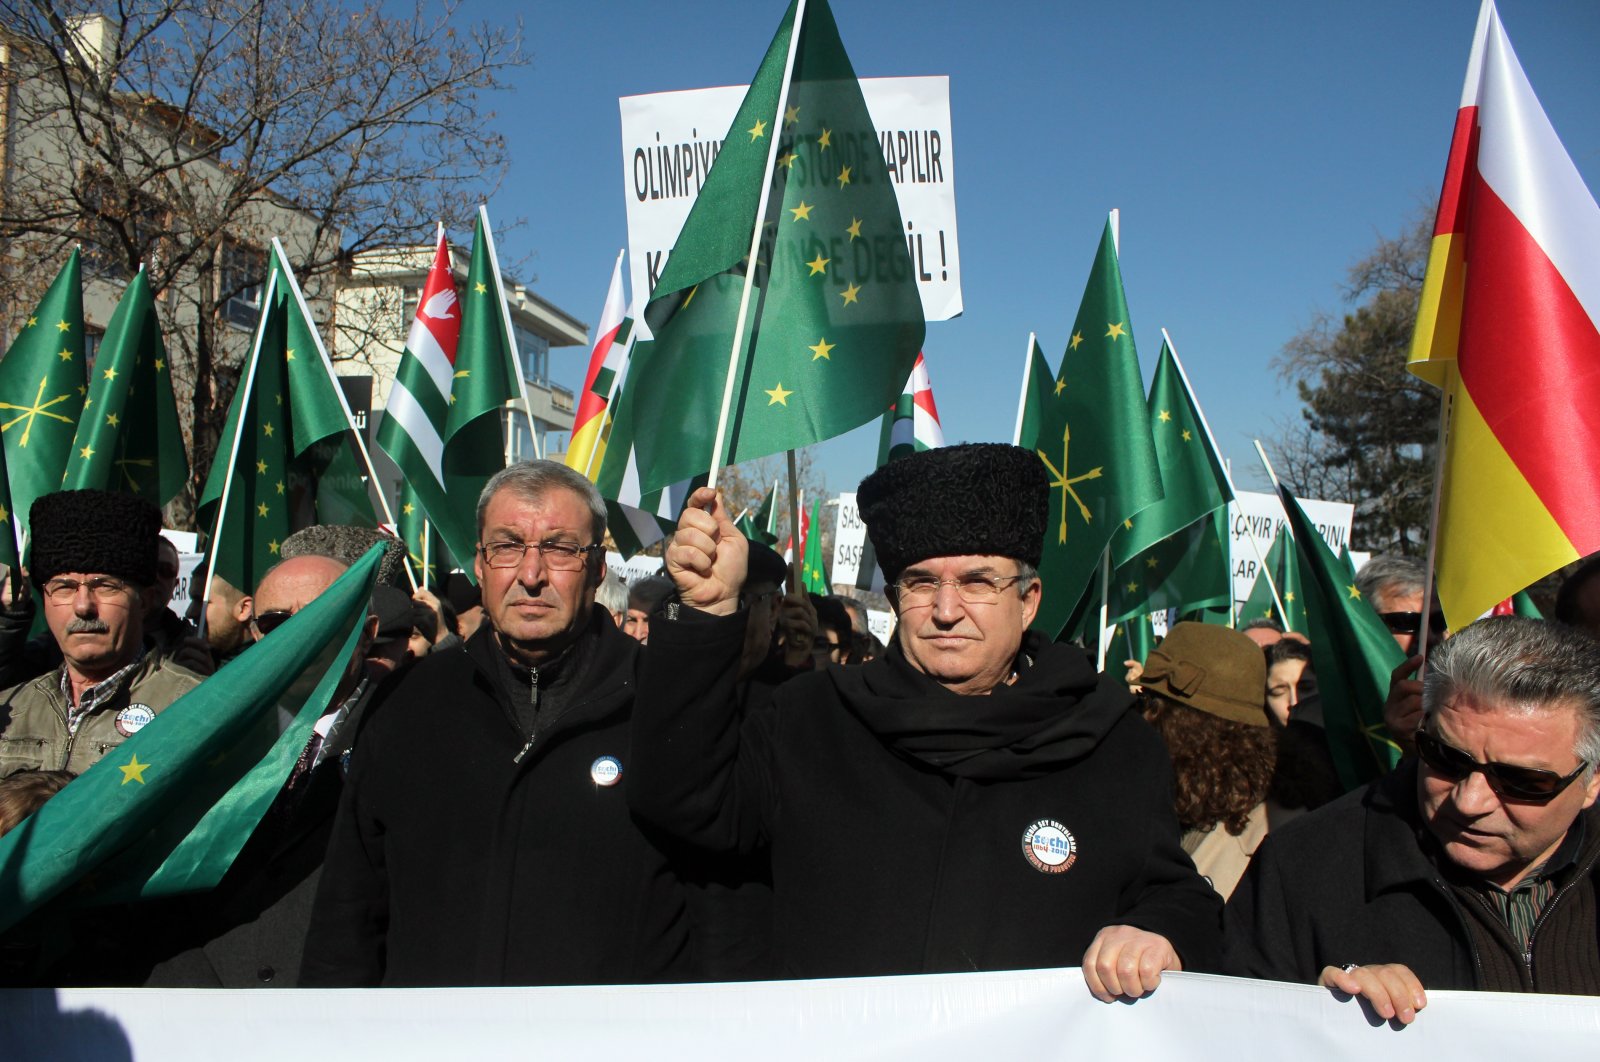 Circassians protest against the decision to make the Russian city of Sochi the home to the 2014 Winter Olympics, in the capital Ankara, Turkey, Feb. 1, 2014. (GETTY IMAGES)